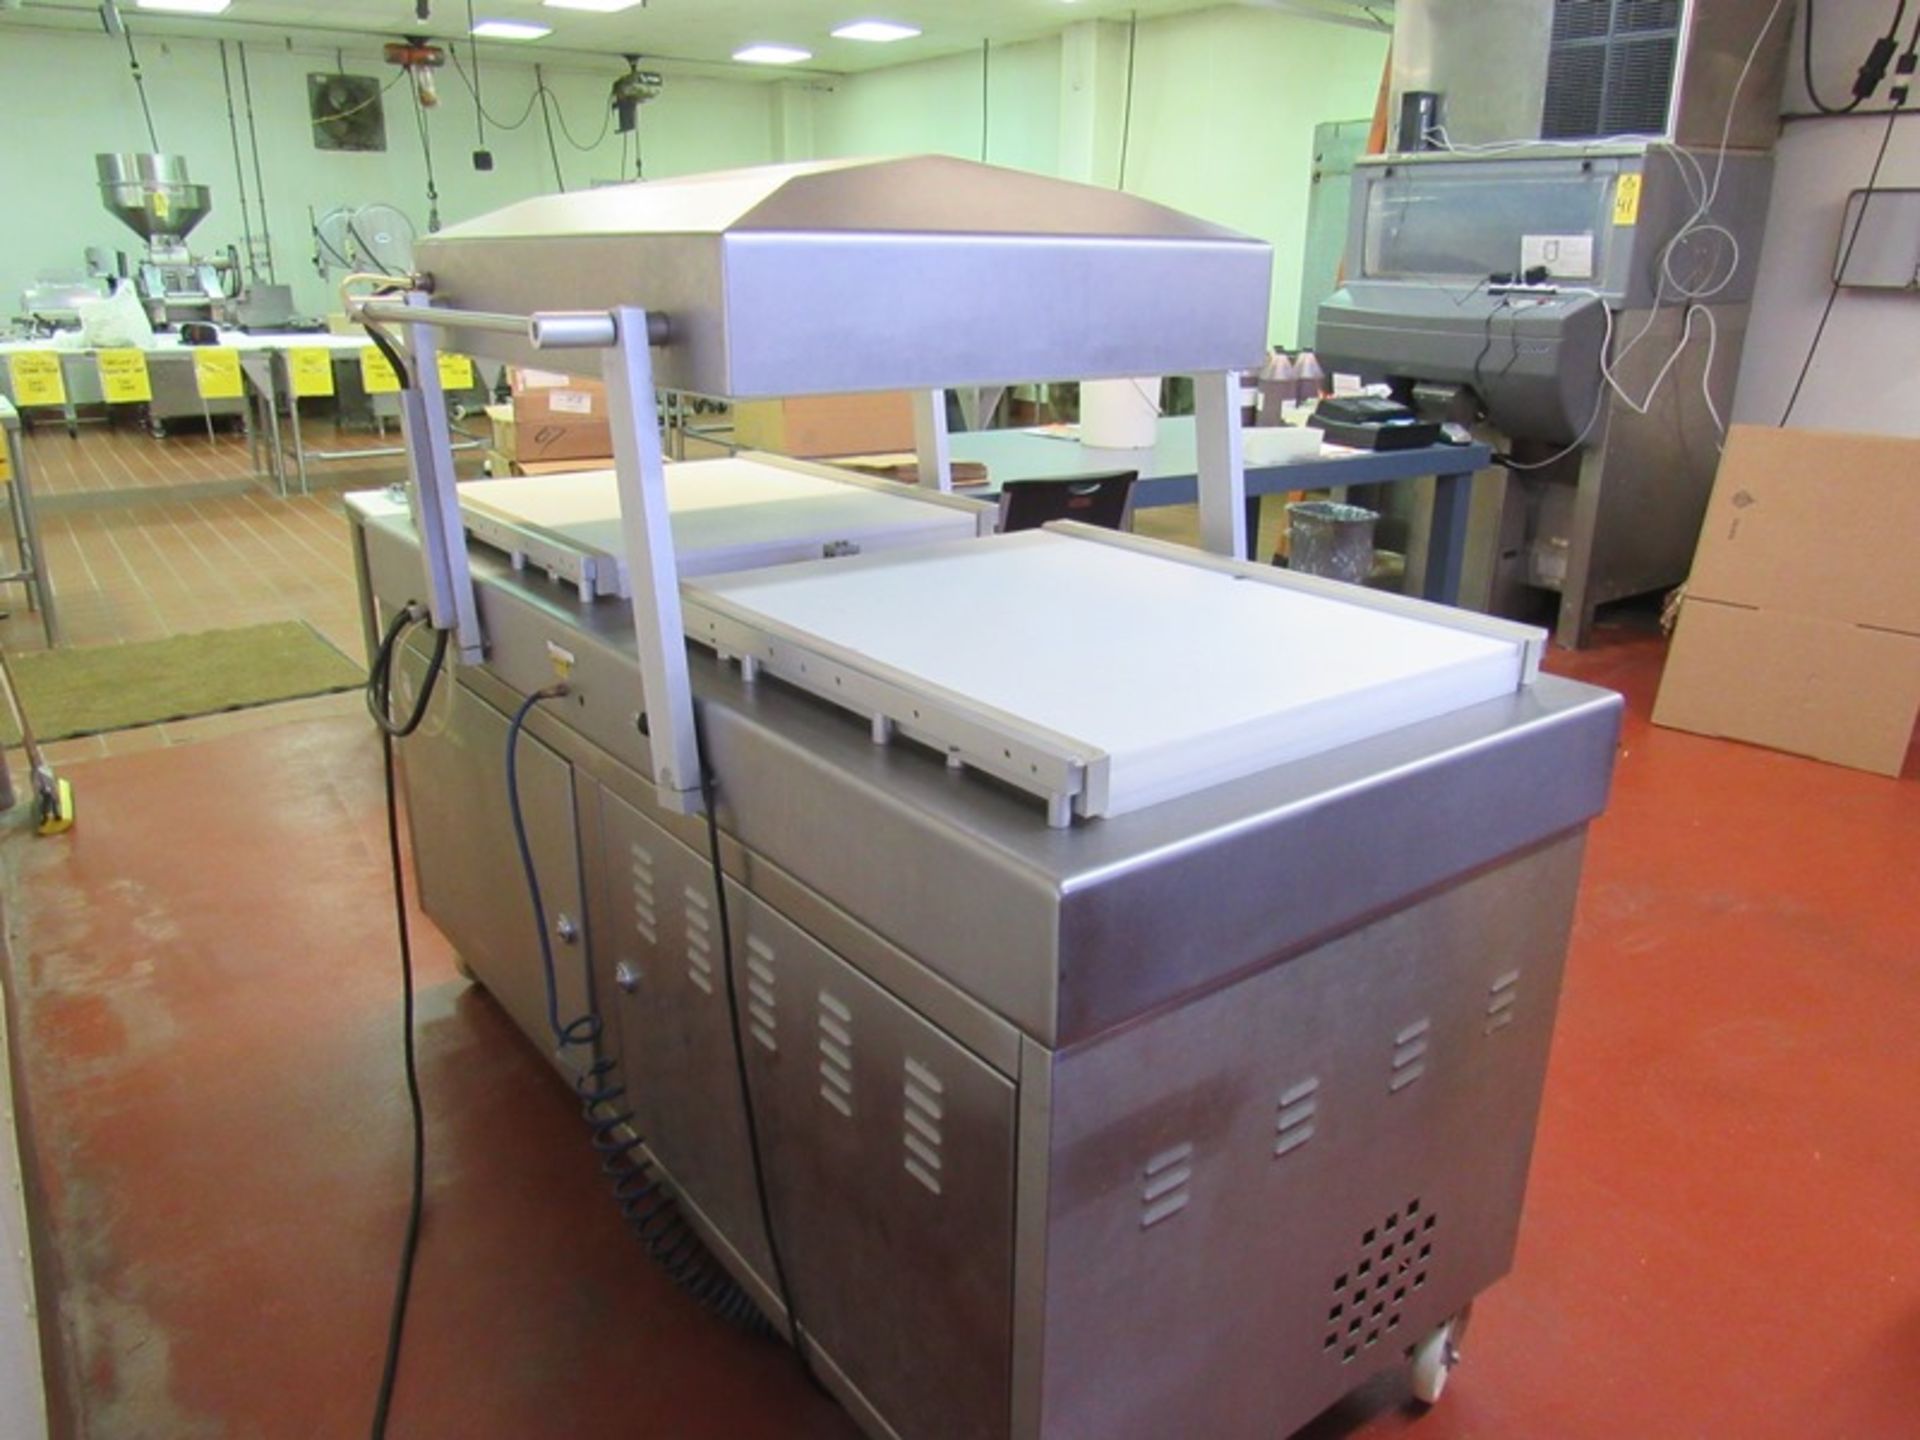 Promarks Mdl. DC800S-FB-PK Double Chamber Packaging Machine, Ser. #6030105, 25" W X 31" L seal - Image 4 of 14